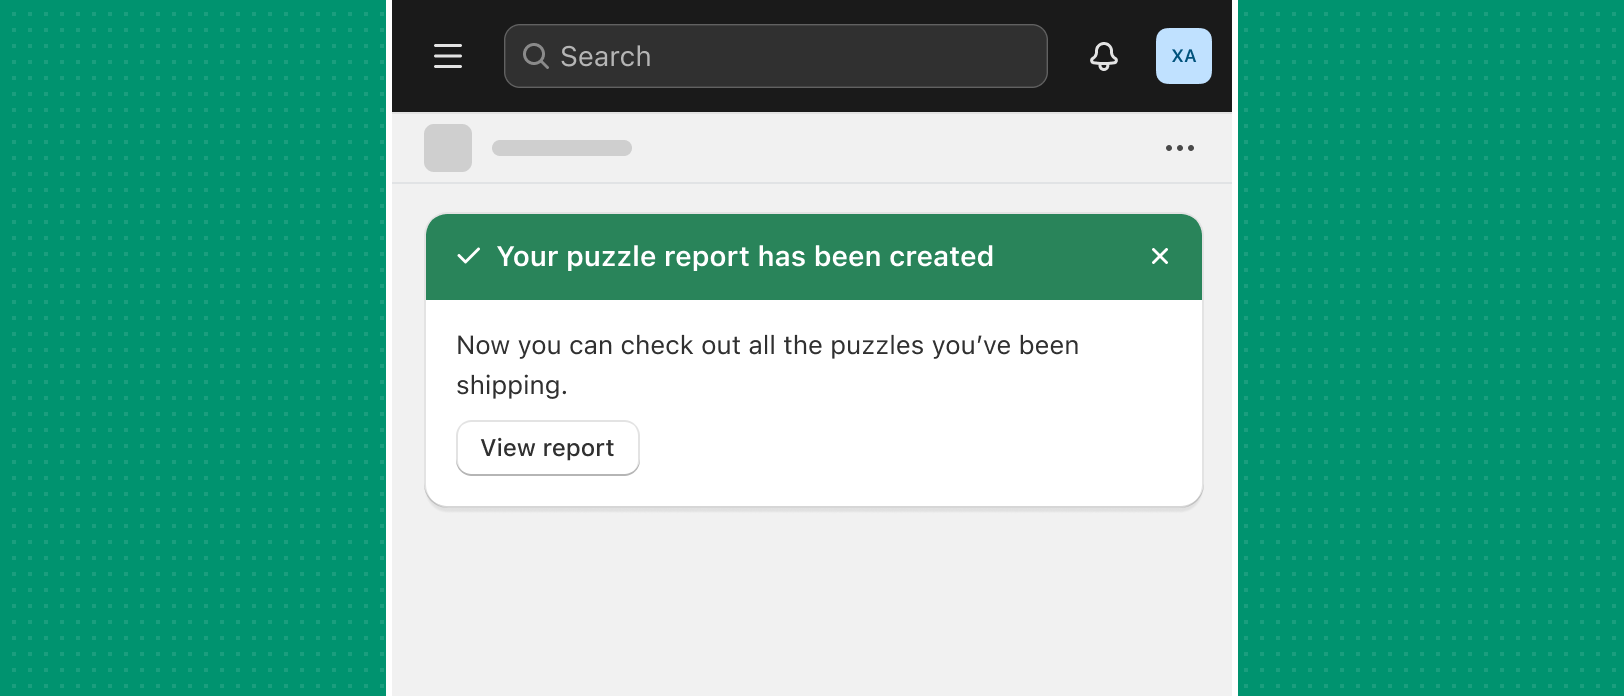 A dismissible success banner in green that reads "Your puzzle has been created" and contains a "View report" button.